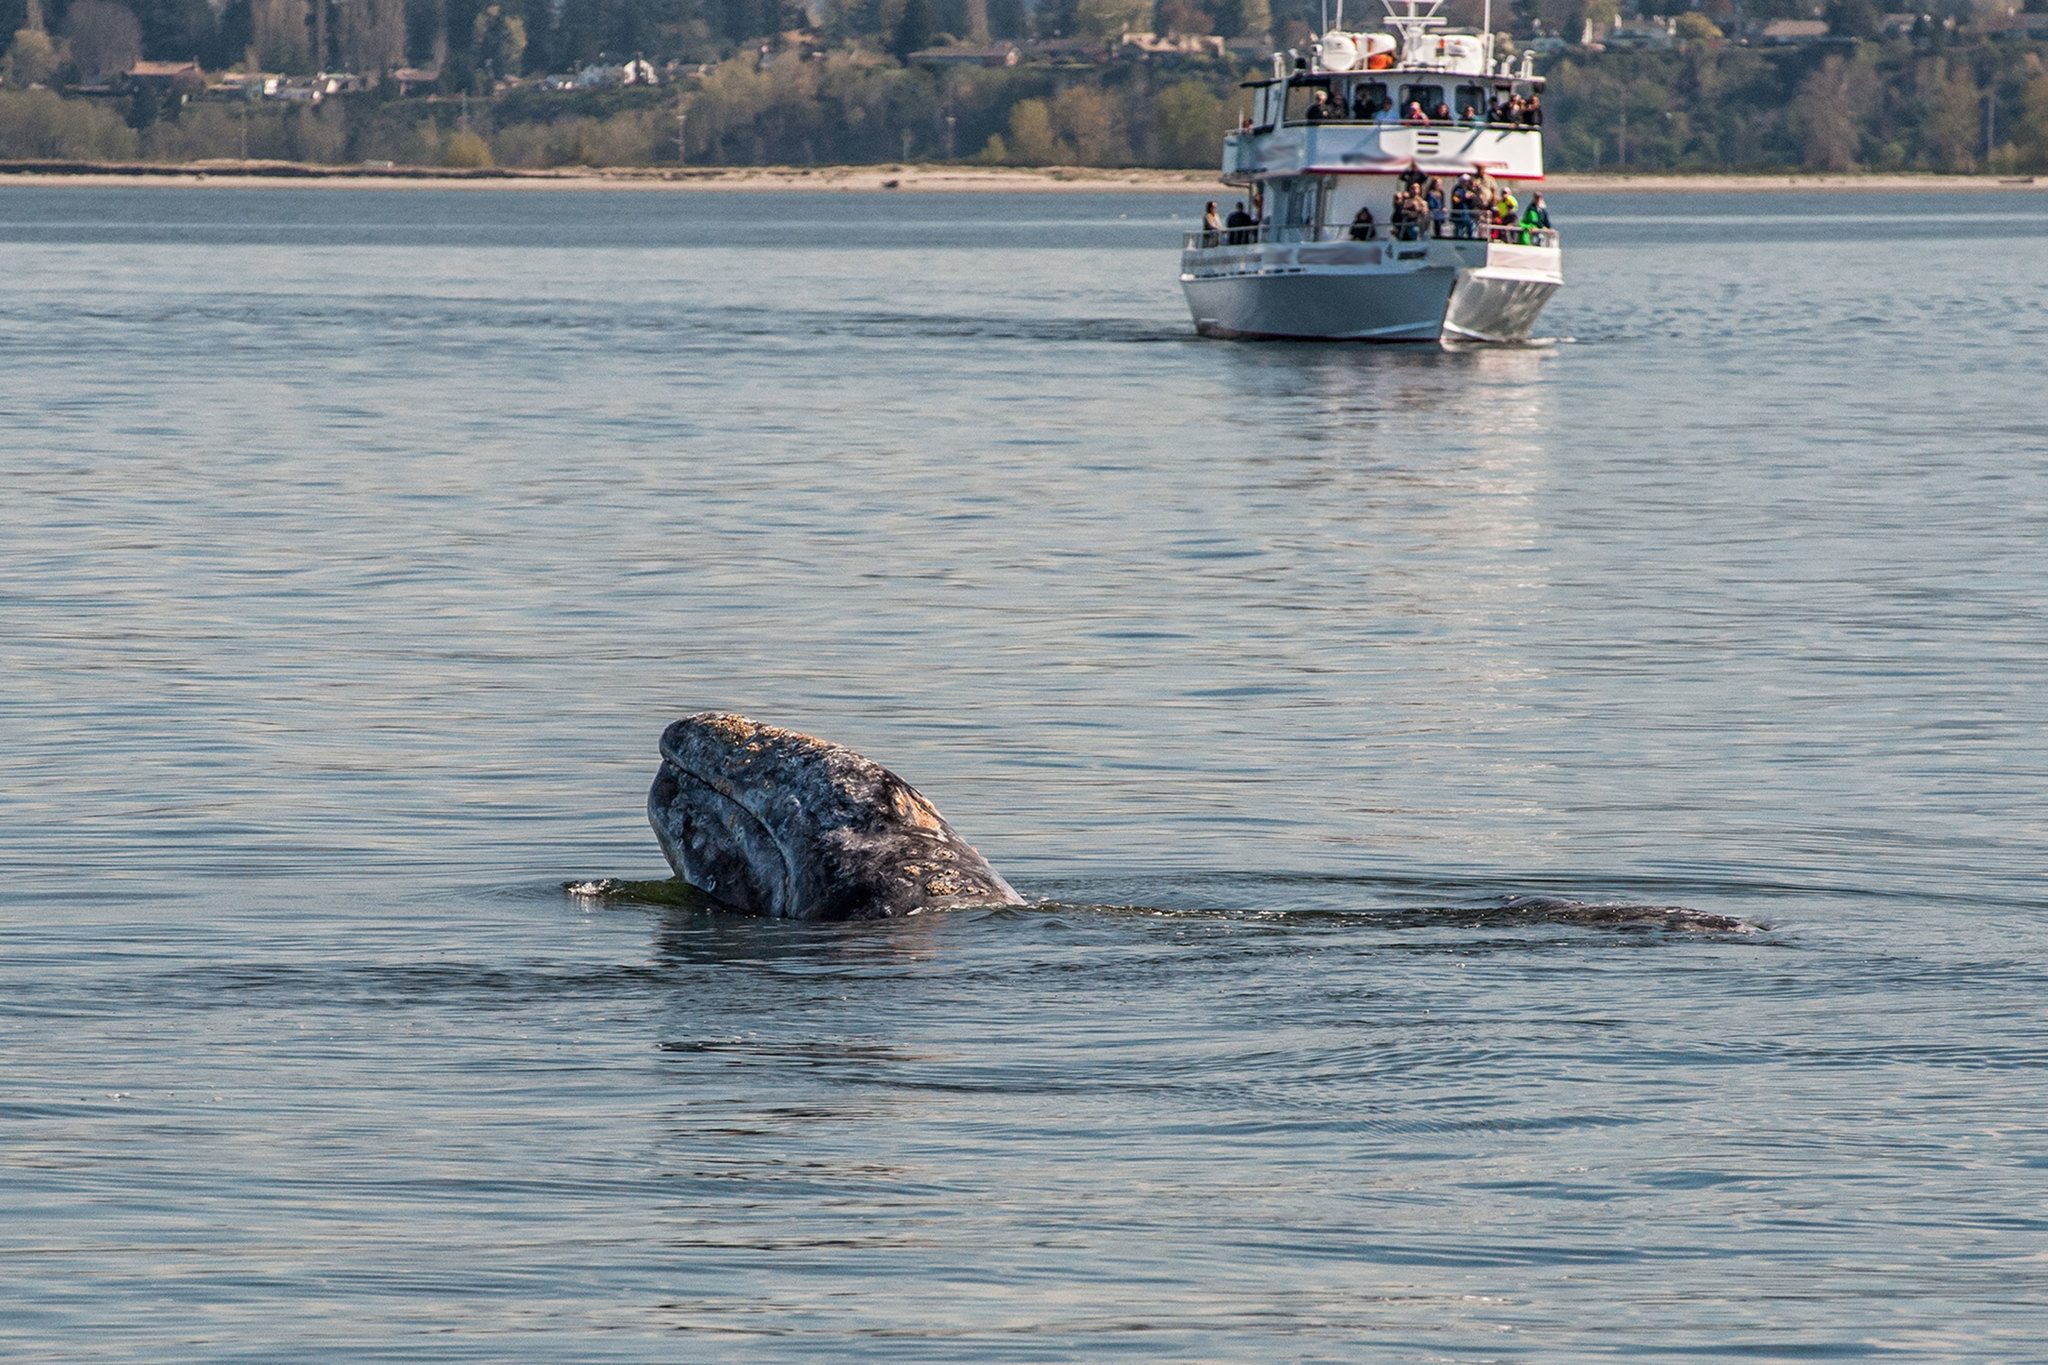 Record file — A gray whale breaches as a boat full of onlookers watches in the background